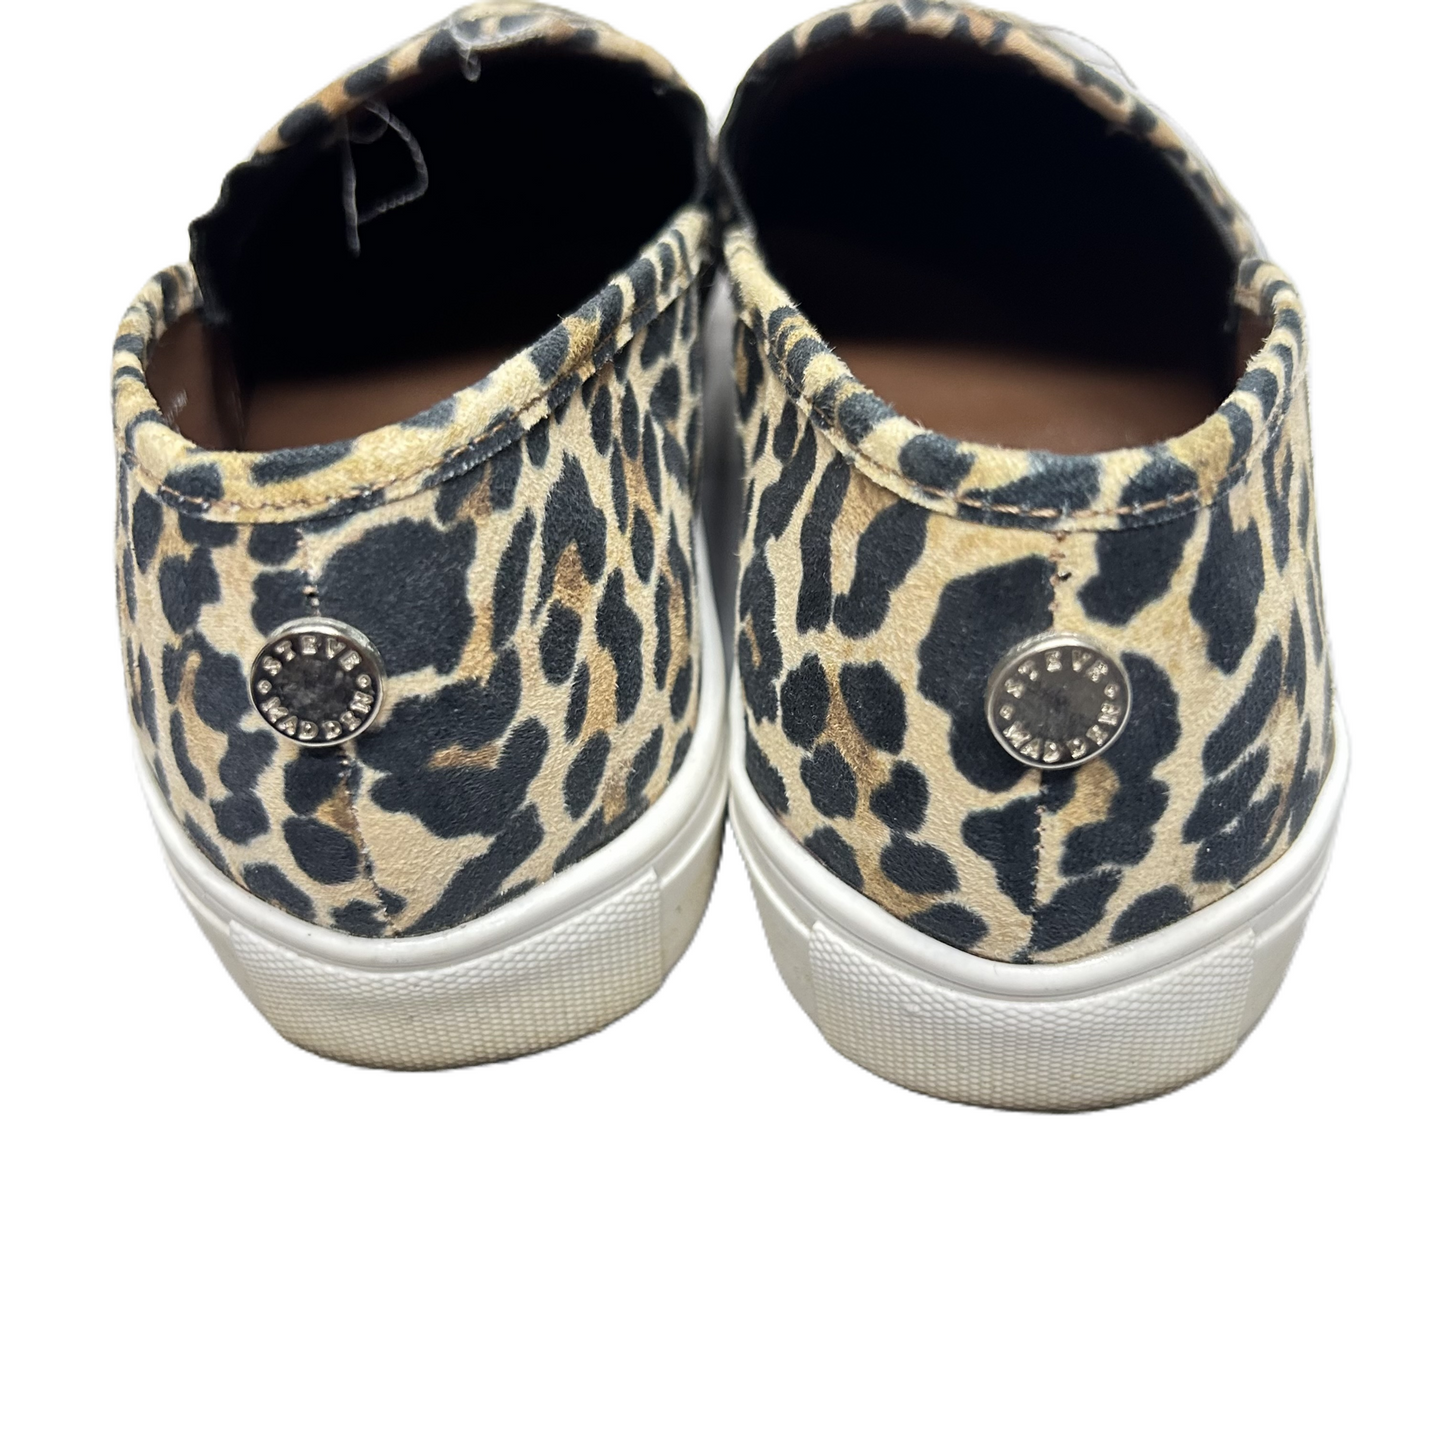 Leopard Print Shoes Flats By Steve Madden, Size: 7.5